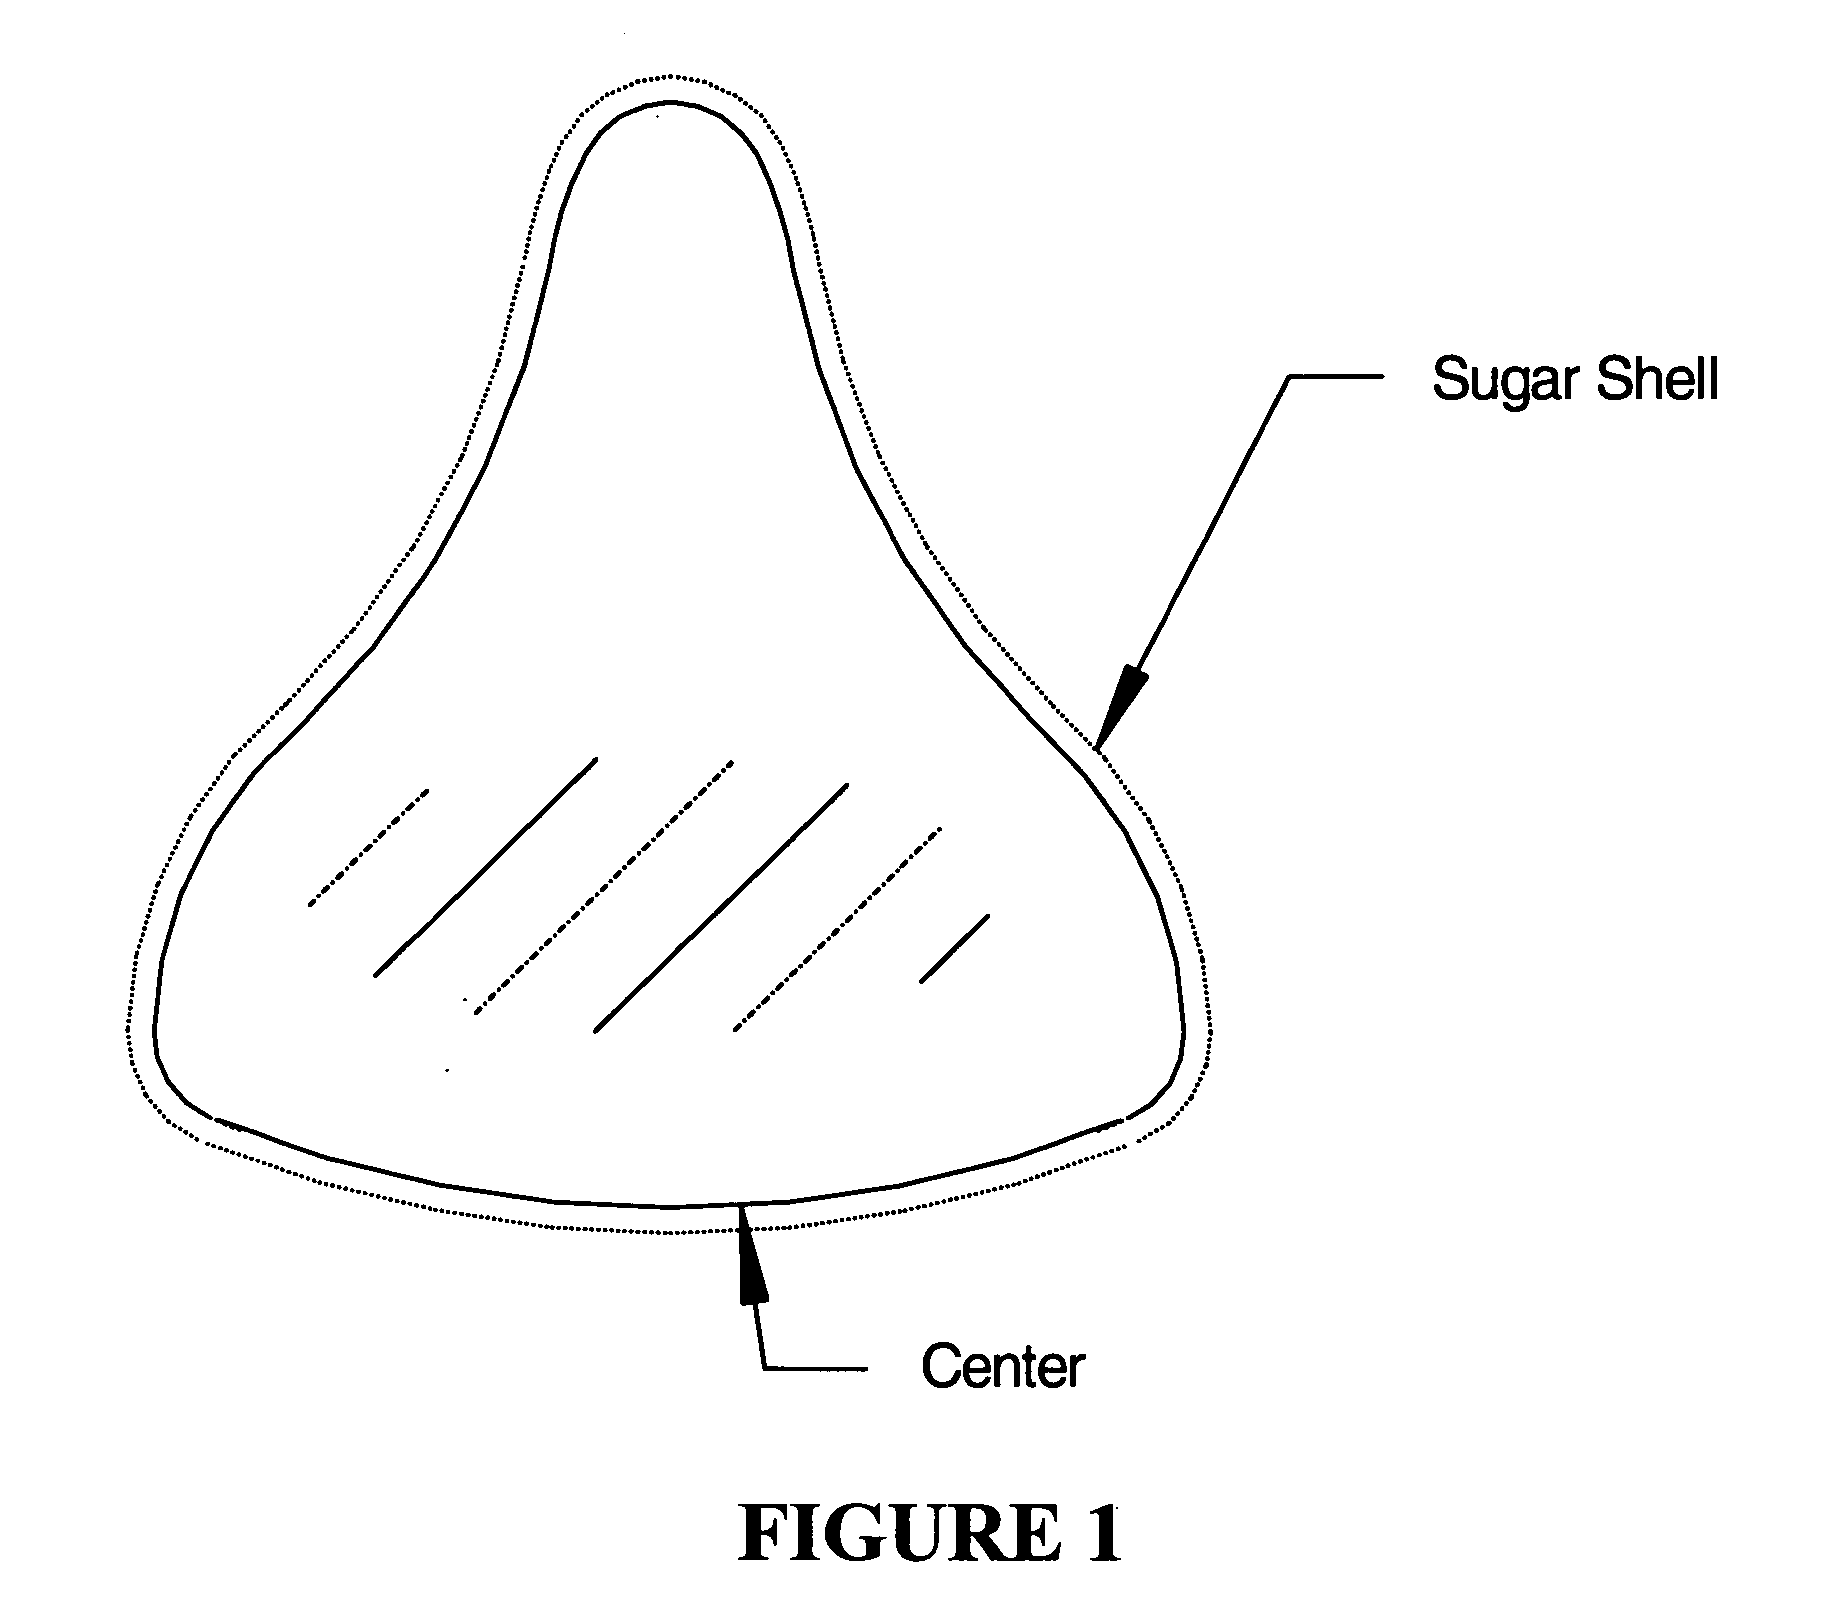 Process for preparing a sugar coating on an irregular shaped confection